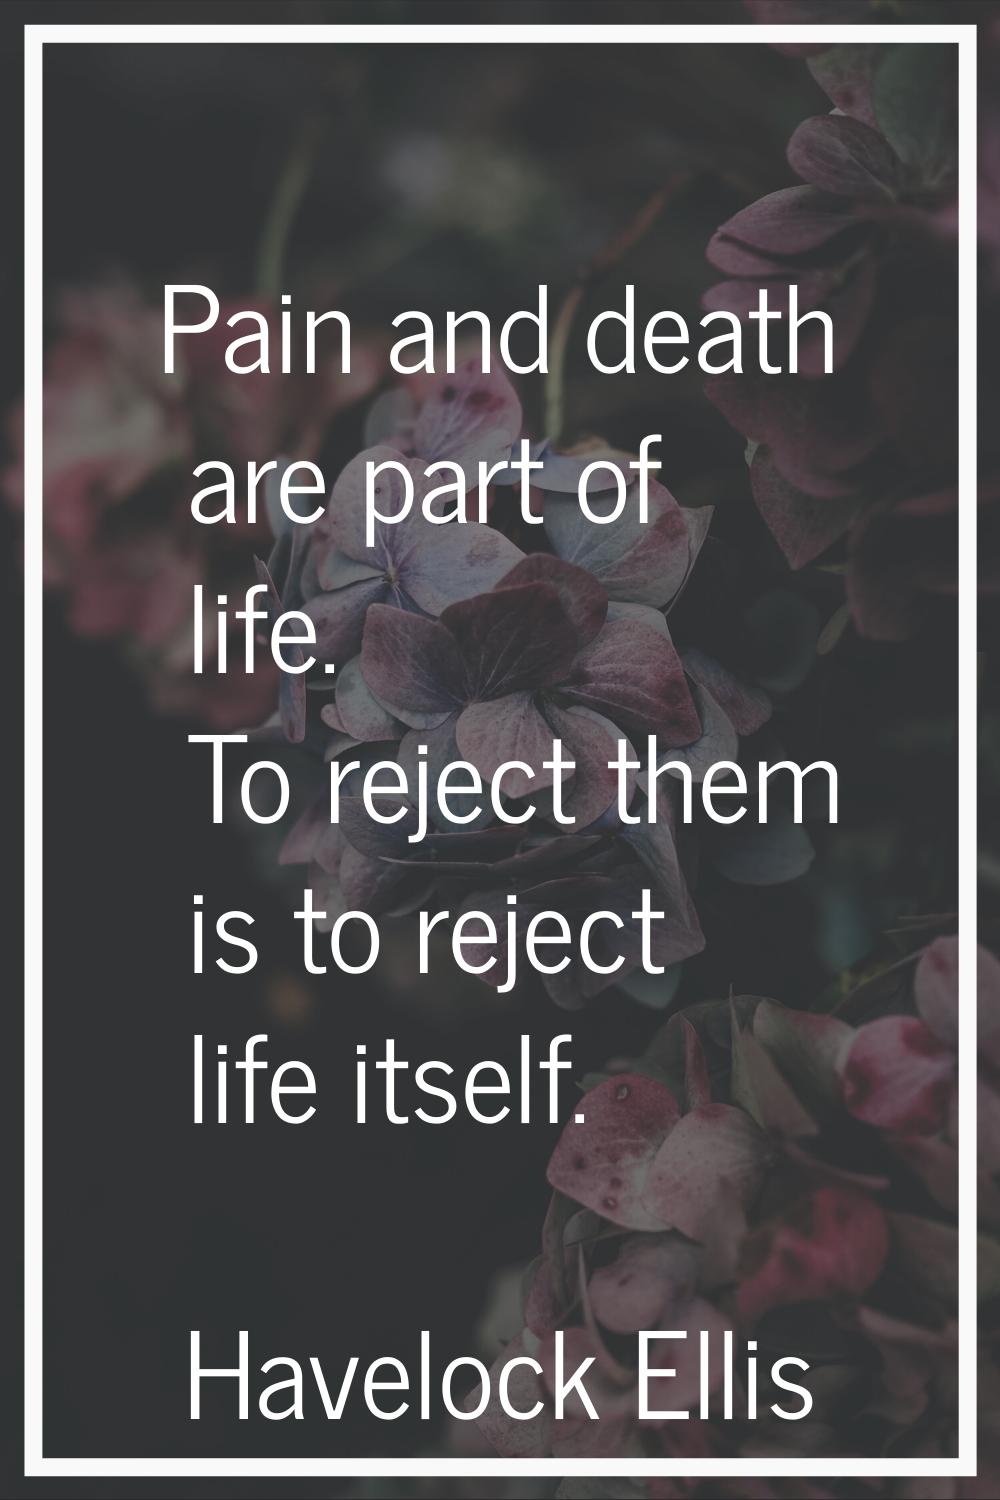 Pain and death are part of life. To reject them is to reject life itself.